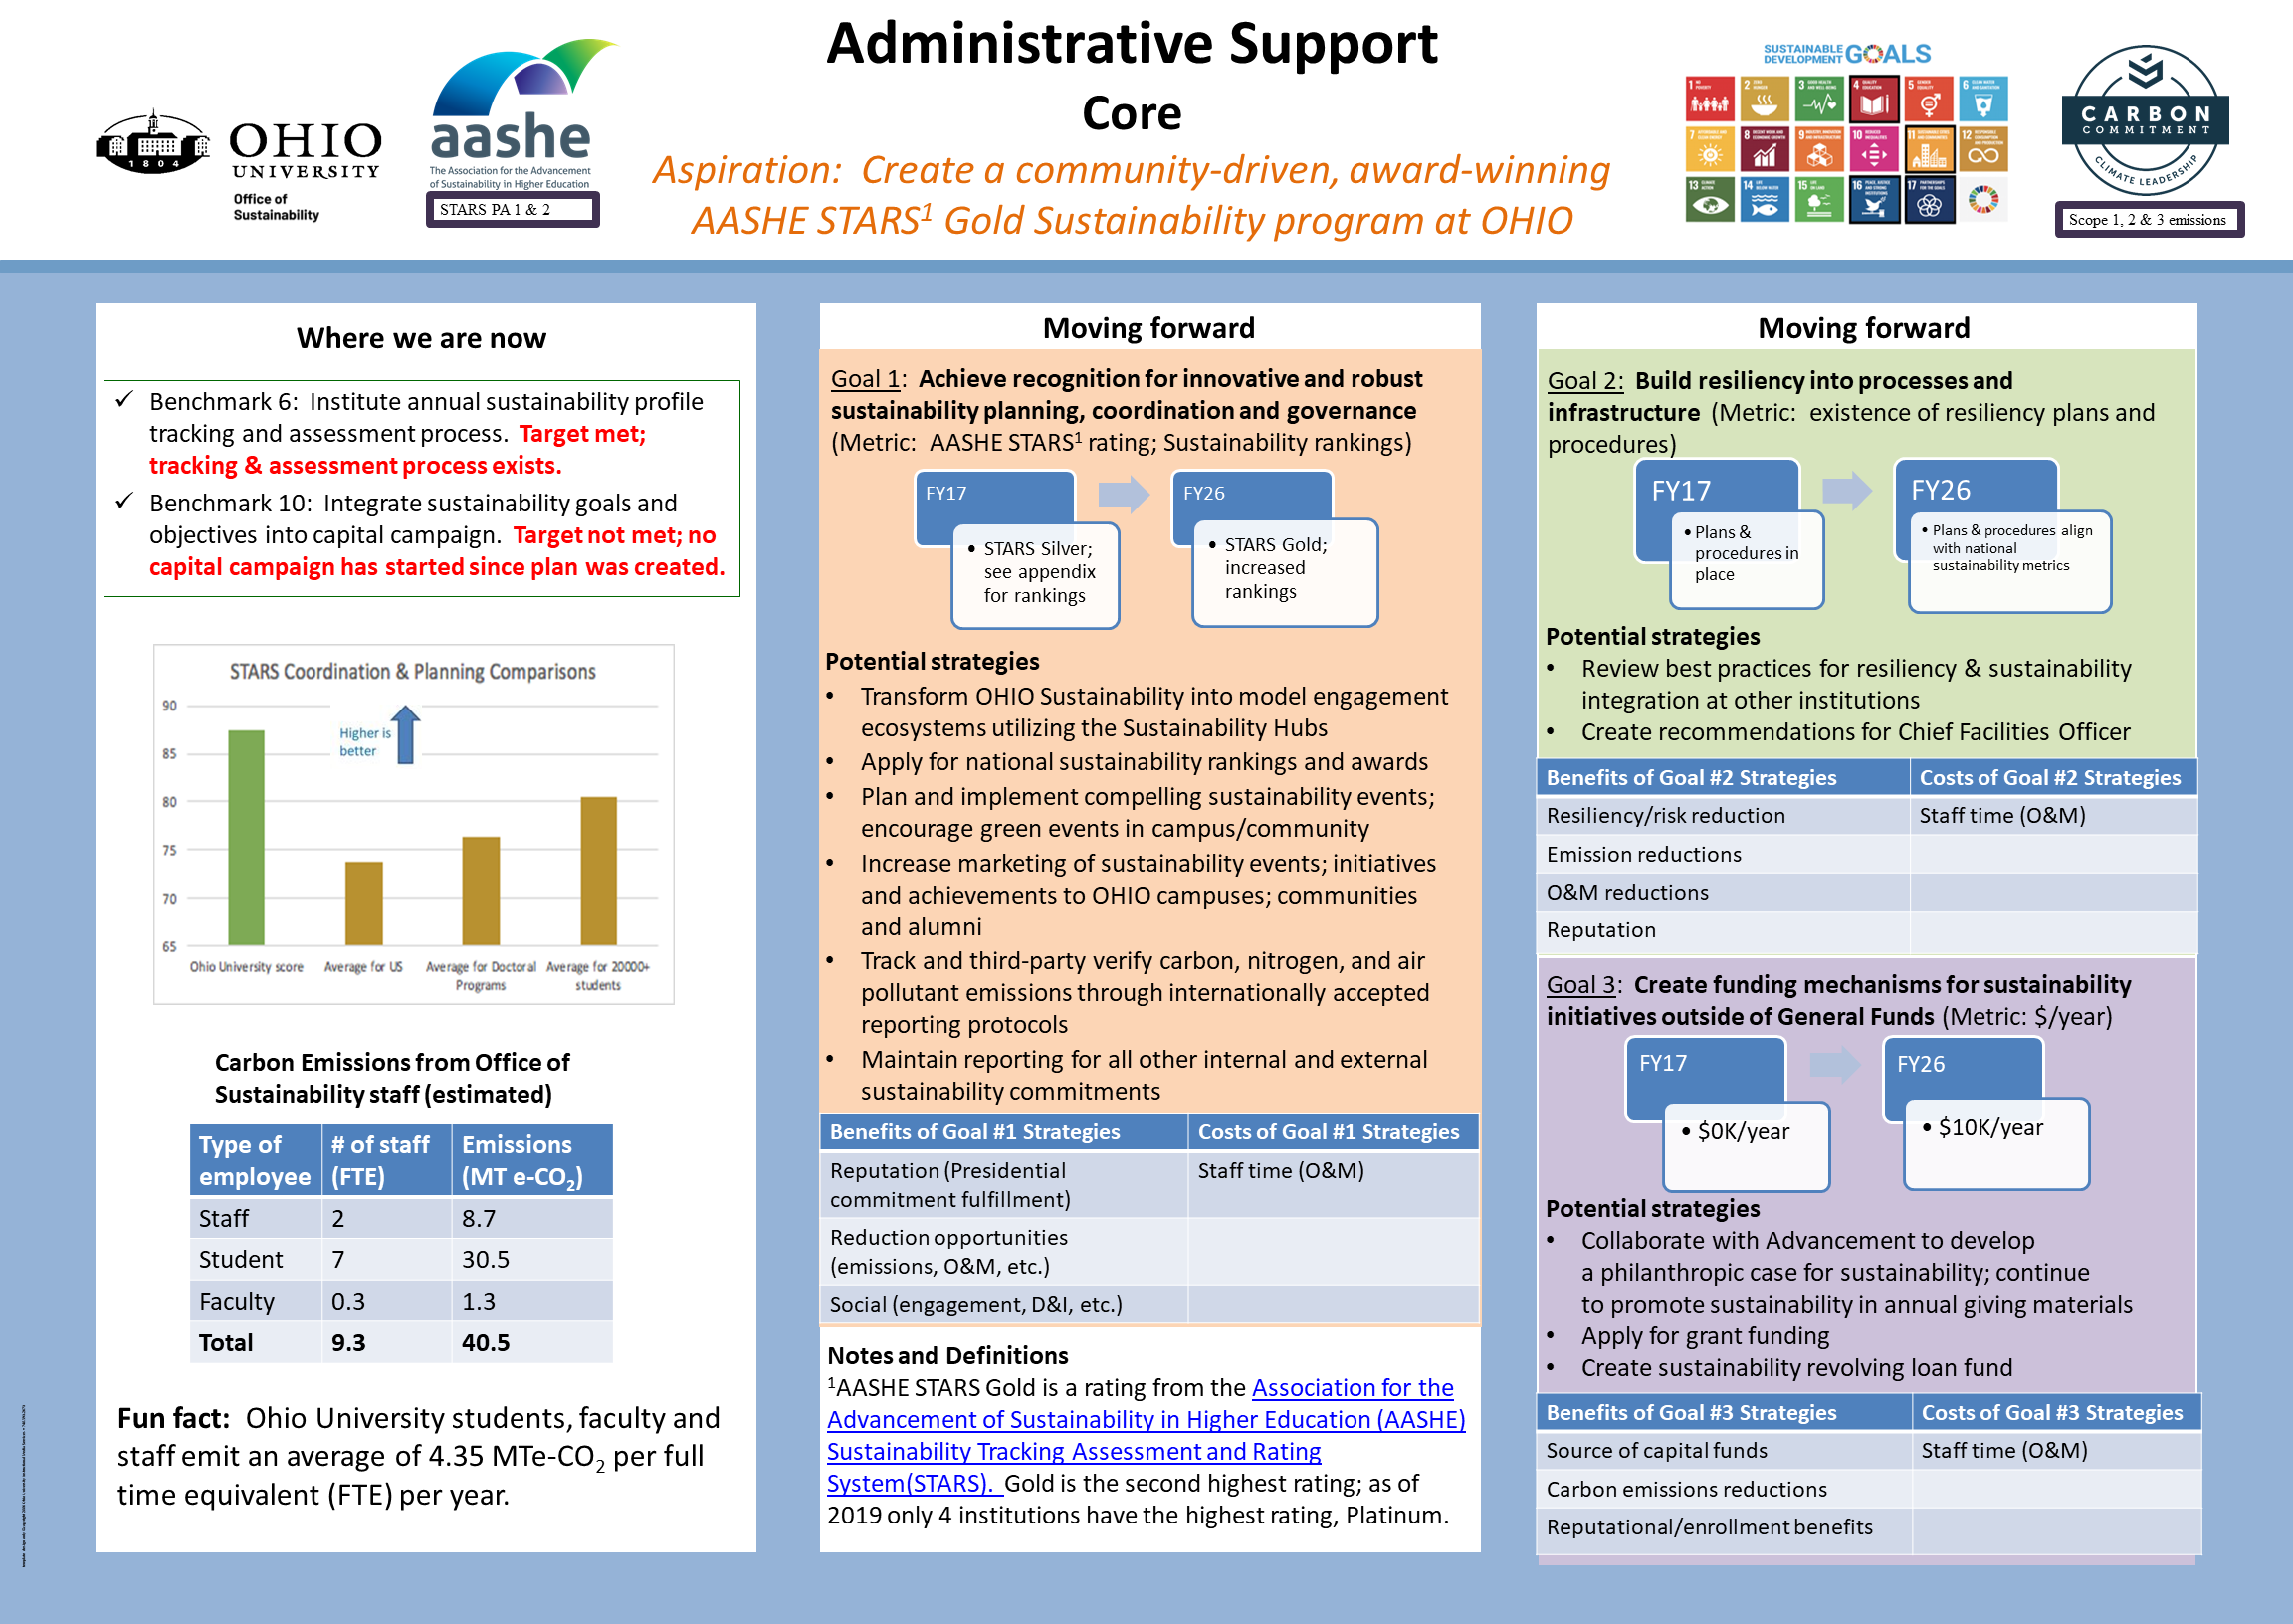 Administrative Support theme of the Sustainability and Climate Action Plan